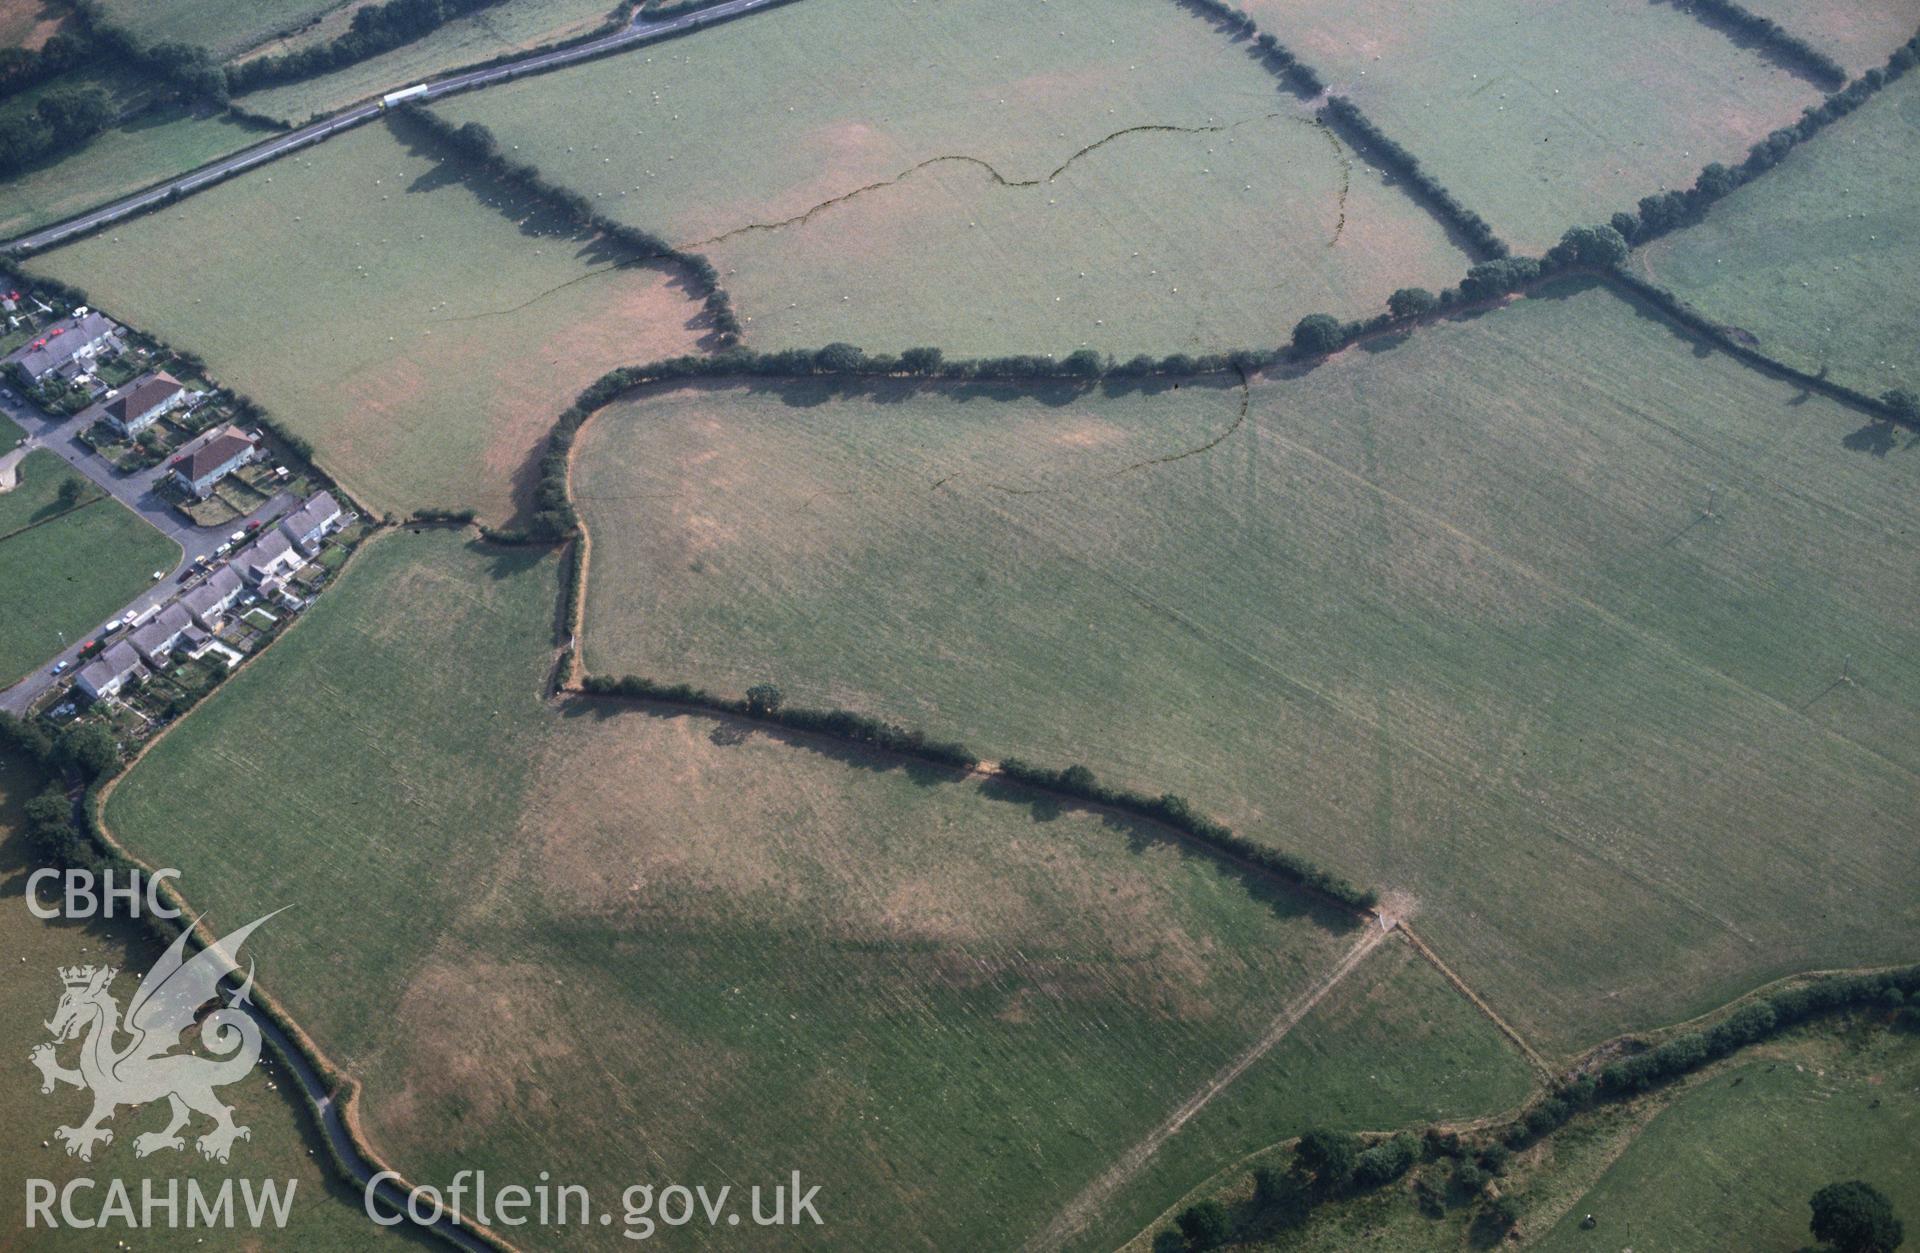 Slide of RCAHMW colour oblique aerial photograph of Pen-llwyn Roman Fort, taken by C.R. Musson, 3/8/1990.